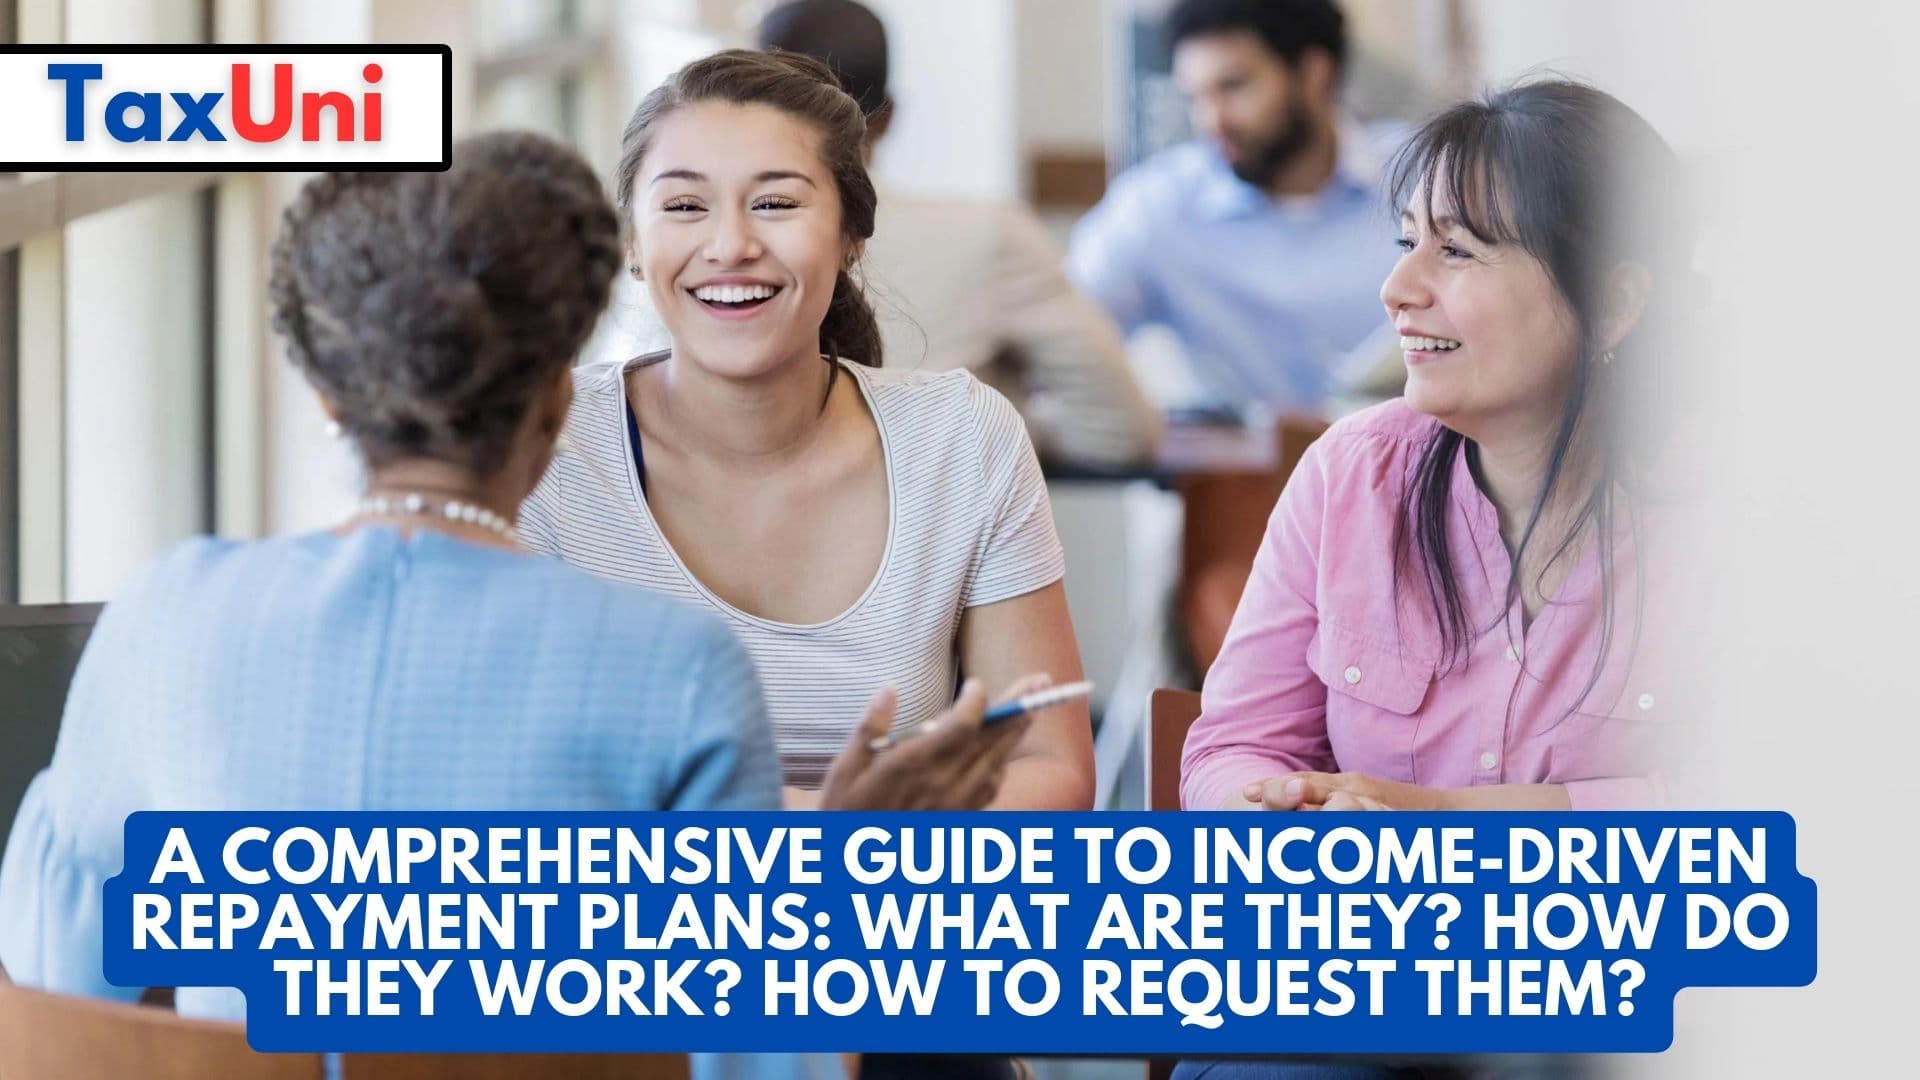 A Comprehensive Guide to Income-Driven Repayment Plans What Are They How Do They Work How to Request Them